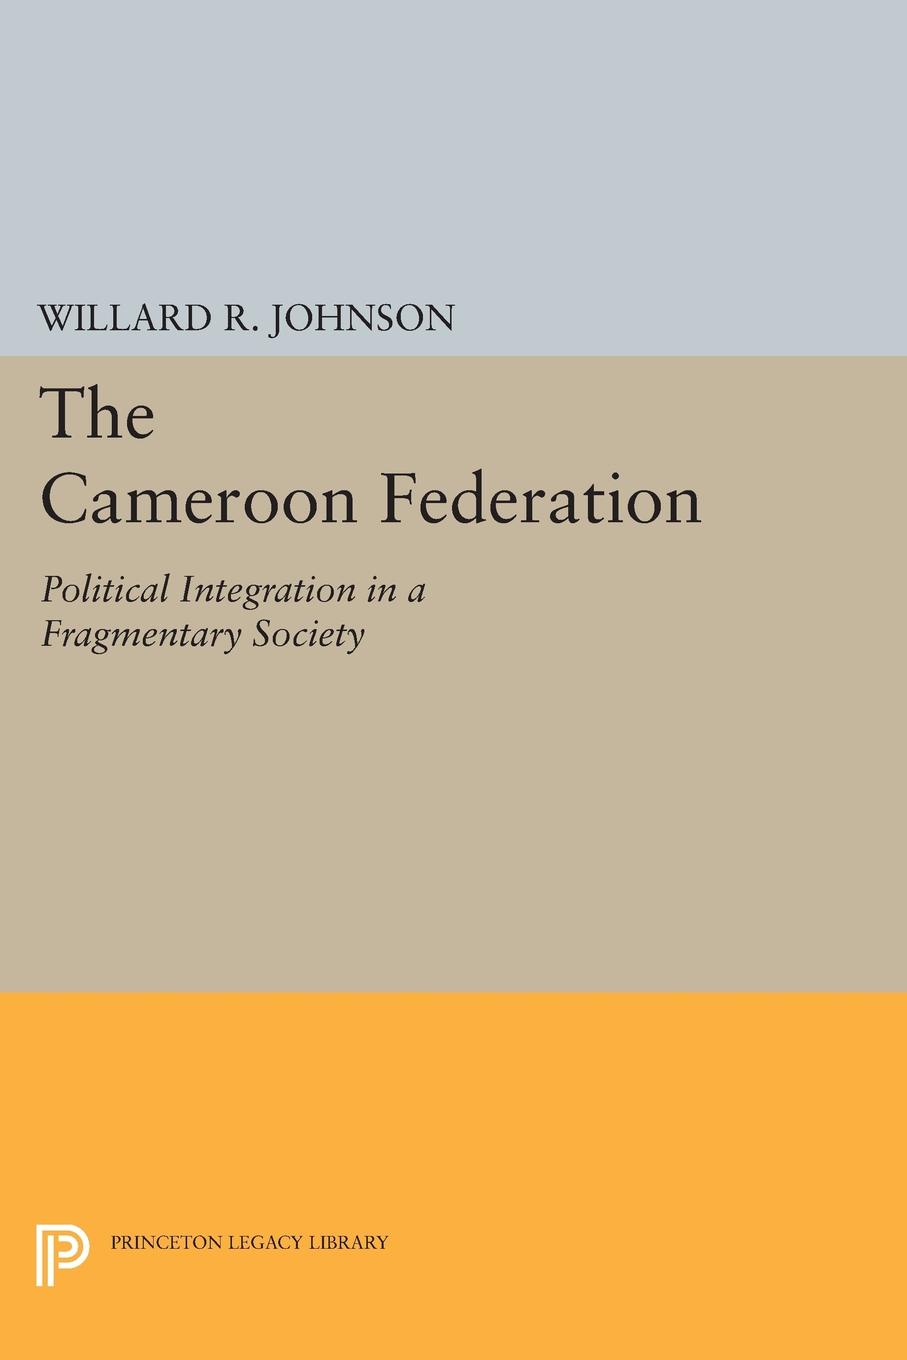 The Cameroon Federation. Political Integration in a Fragmentary Society